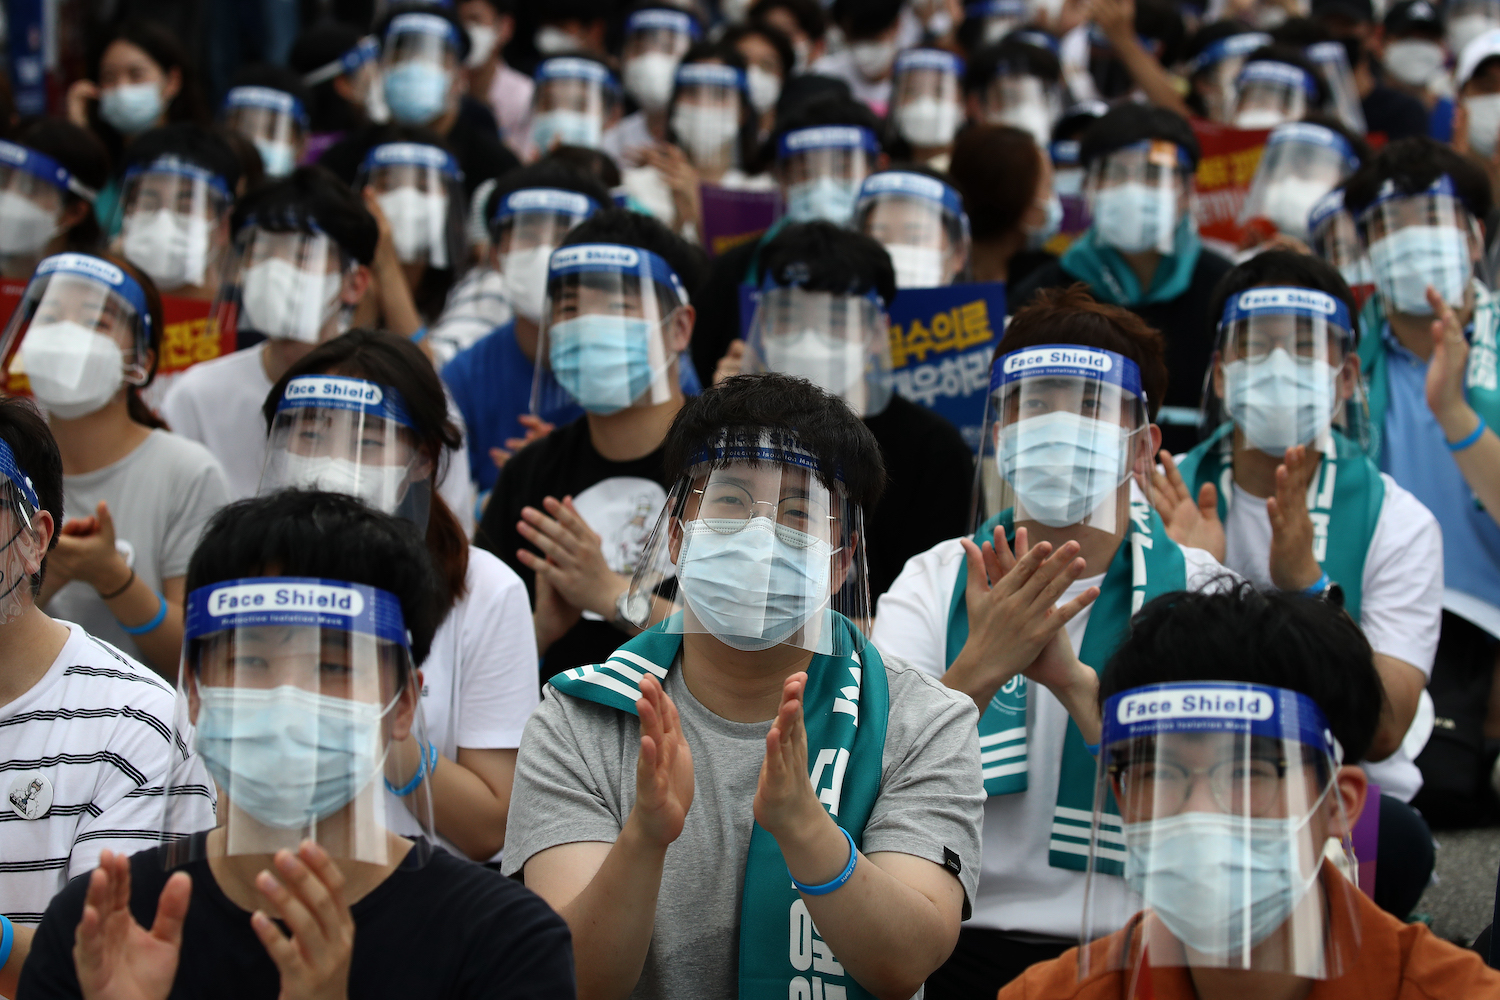 Doctors and medical students wearing protective equipment as a preventive measure against COVID-19 attend a rally against the government medical plan in Seoul on Aug. 14, 2020.